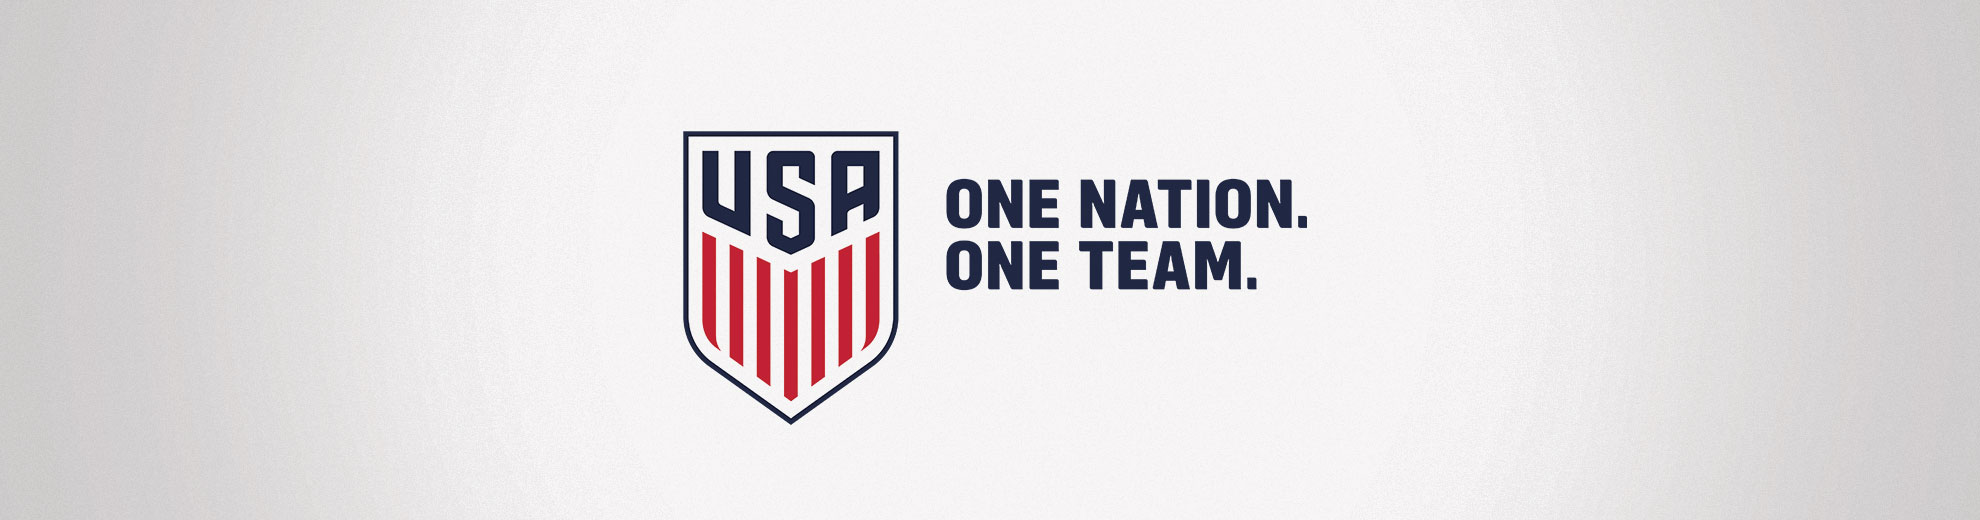 US Soccer’s Brand issues